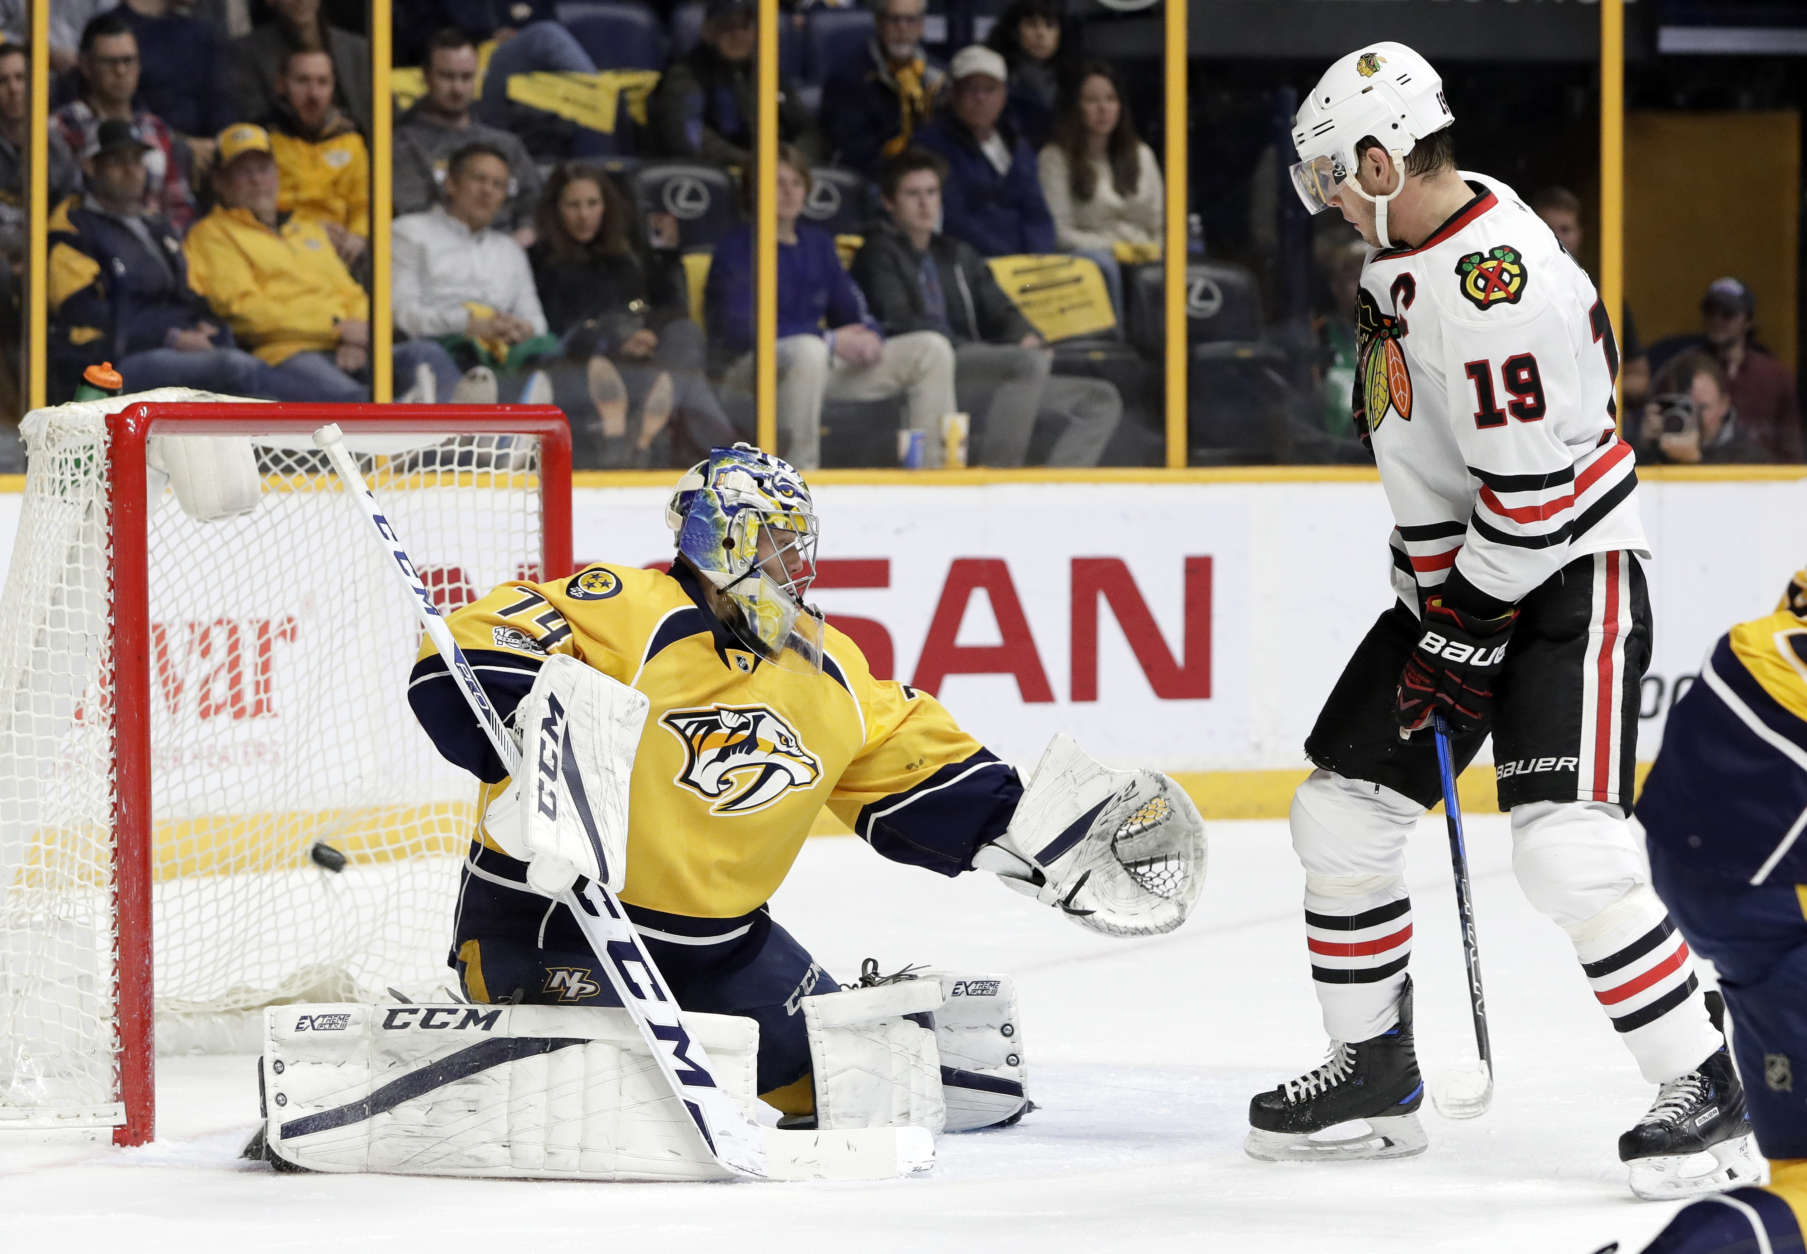 Chicago Blackhawks center Jonathan Toews (19) watches as a shot by teammate Patrick Kane gets past Nashville Predators goalie Juuse Saros (74), of Finland, for a goal during the first period of an NHL hockey game Saturday, March 4, 2017, in Nashville, Tenn. (AP Photo/Mark Humphrey)